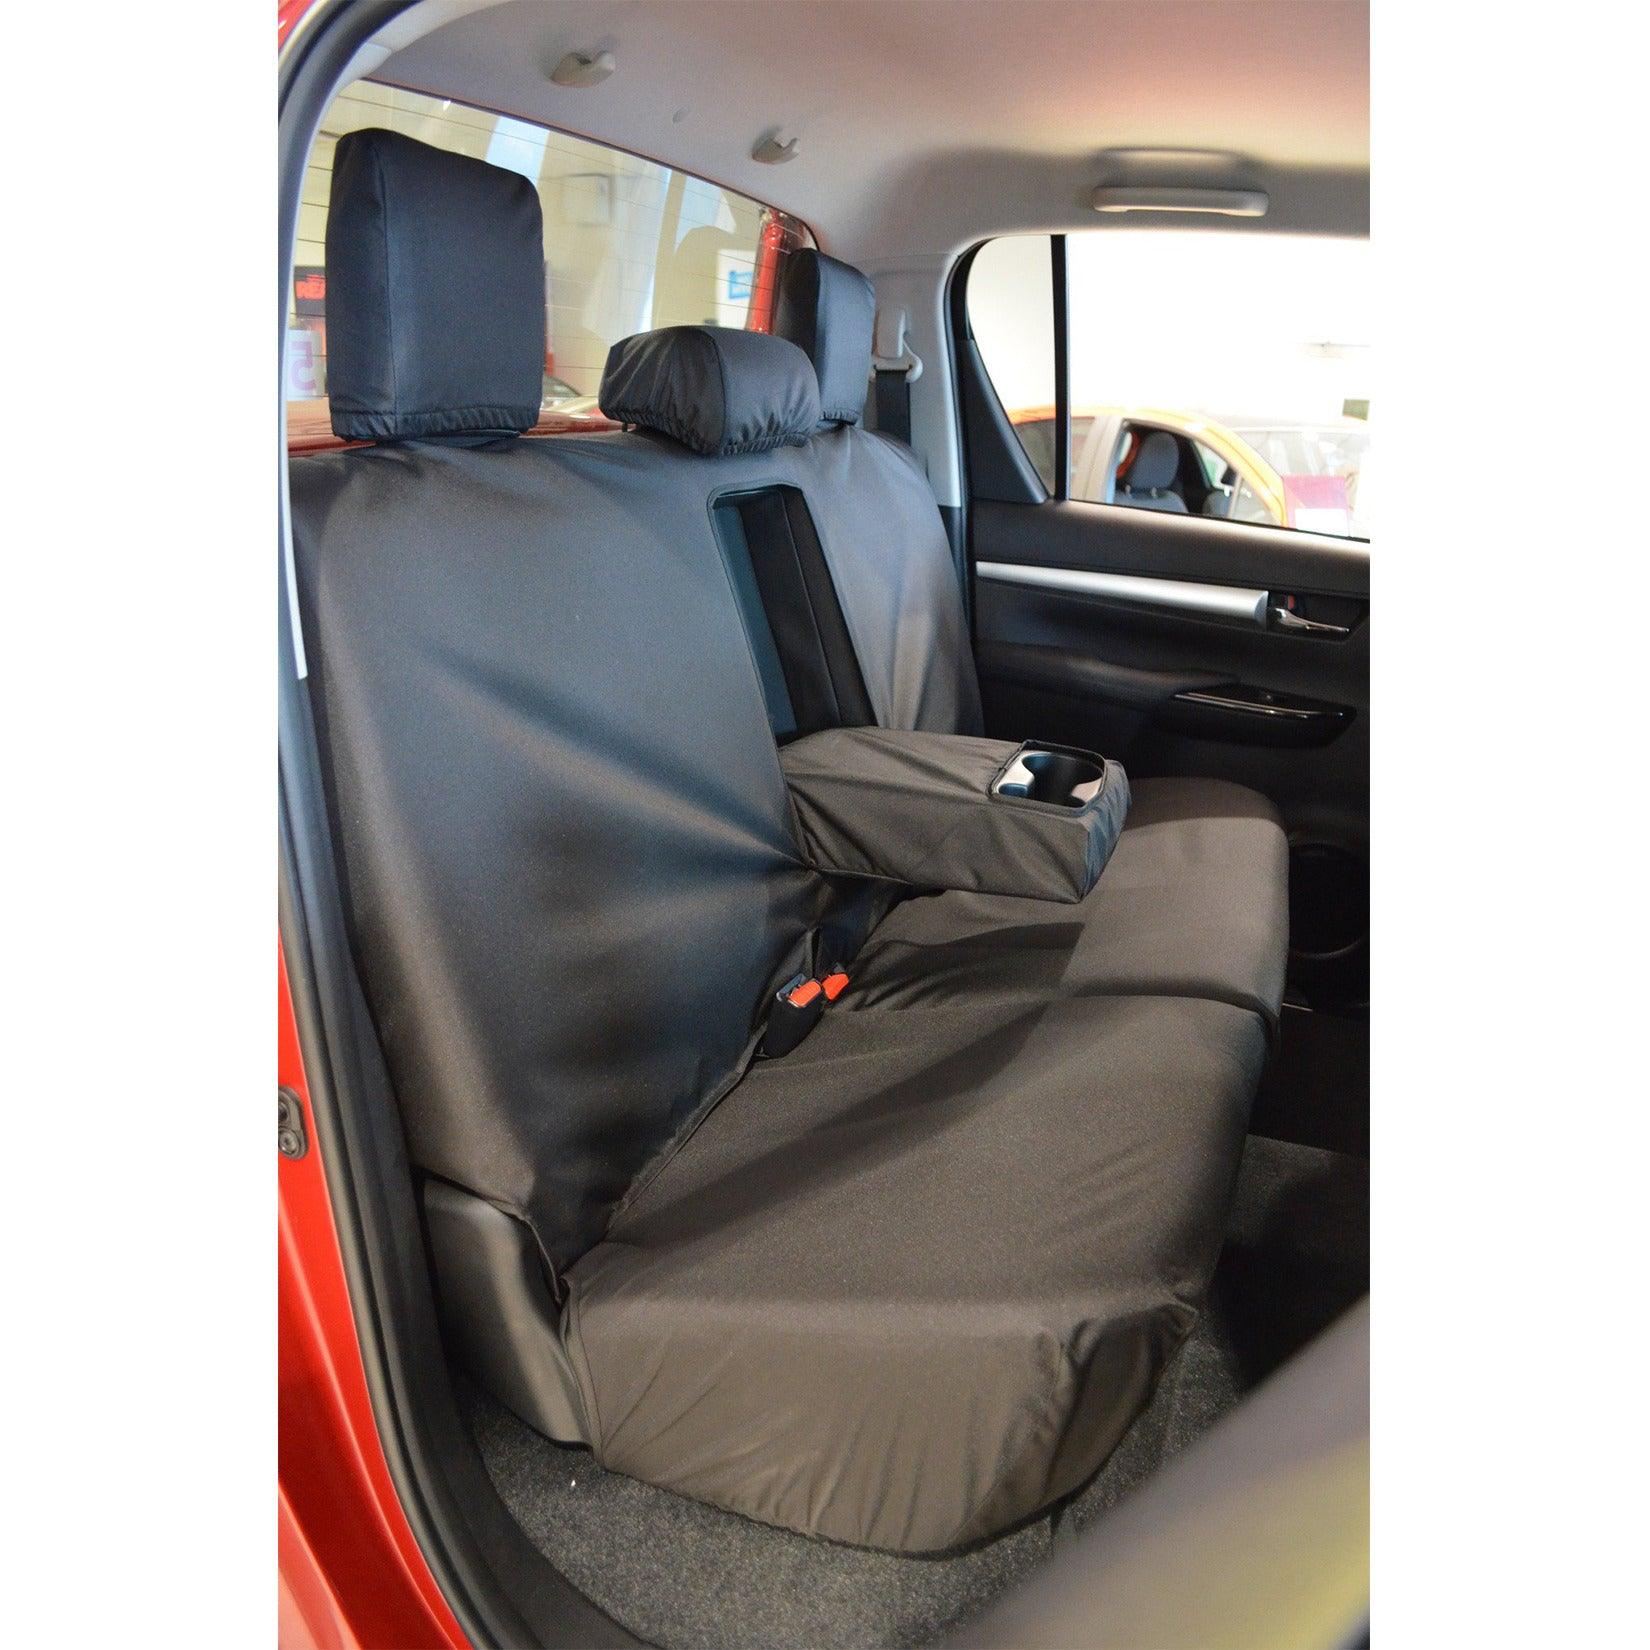 TOYOTA HILUX MK8 & MK9 INVINCIBLE 2016 ON - DOUBLE CAB REAR SEAT COVERS - BLACK - Storm Xccessories2